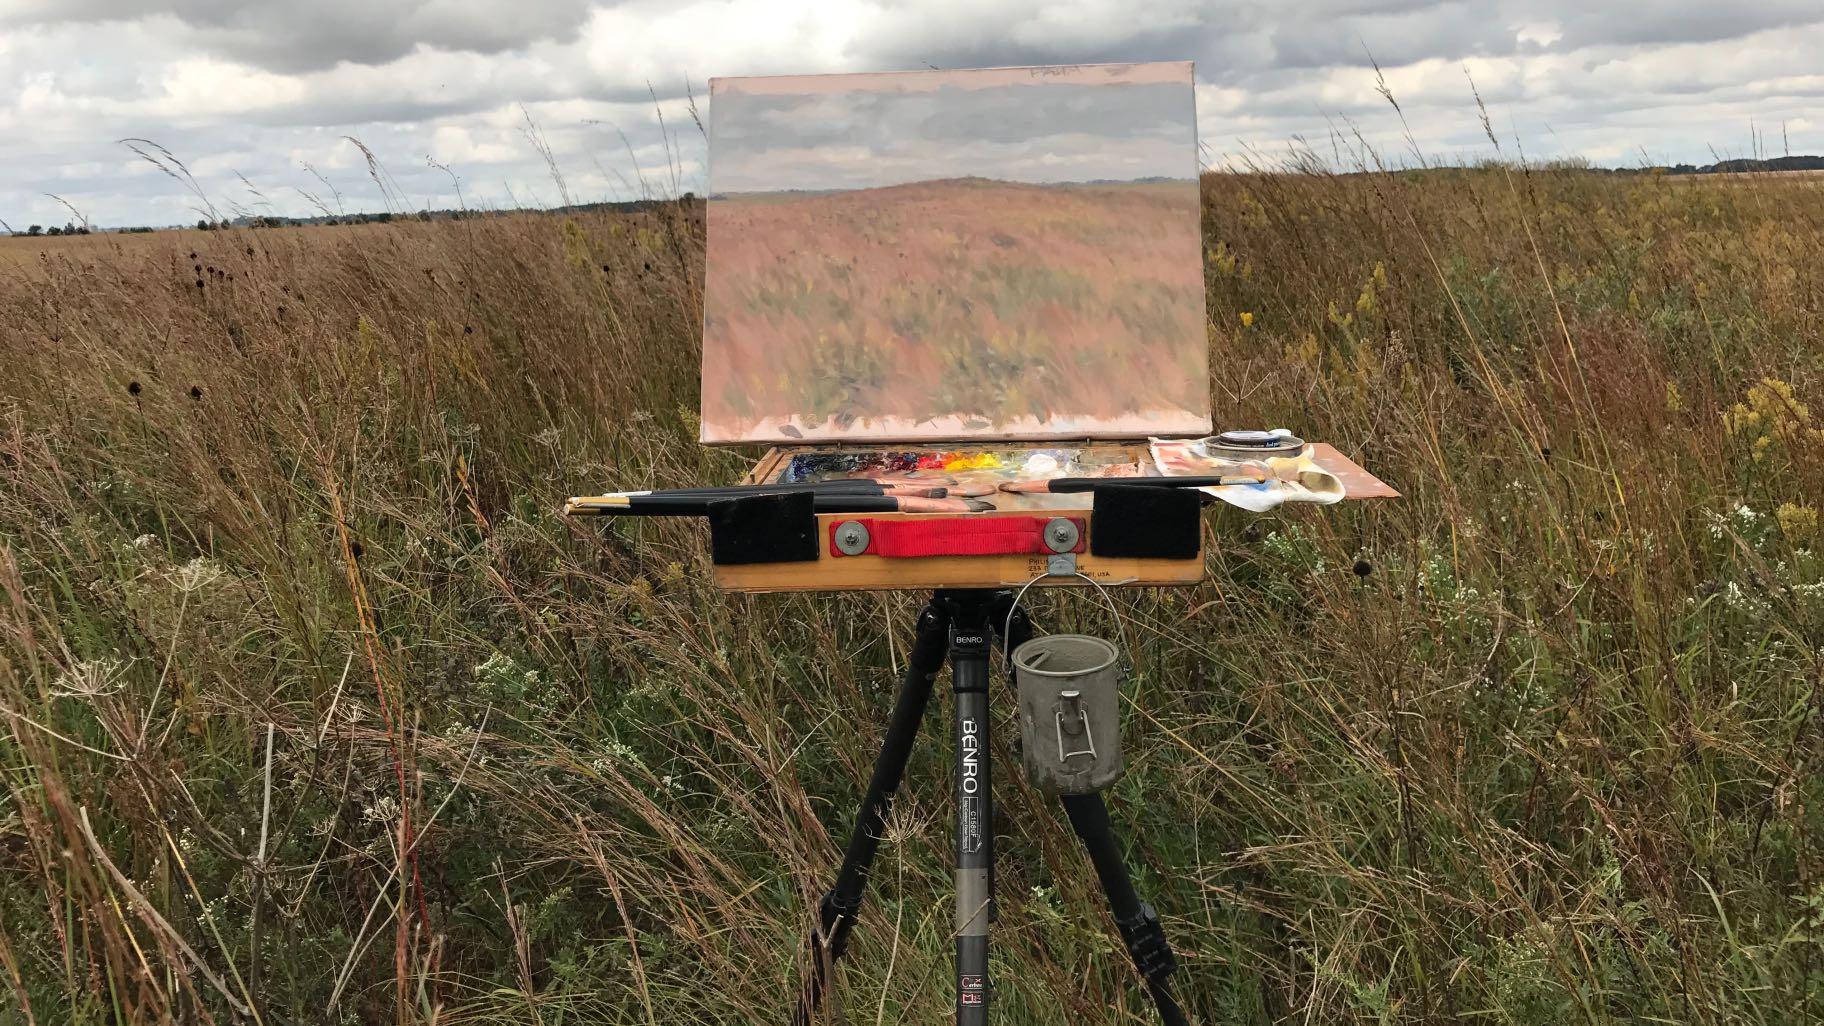 Using portable gear, artist Philip Juras creates field study sketches to capture rough details on site, which will be used to inform a more detailed, larger painting completed in his Georgia studio. (Credit Philip Juras)